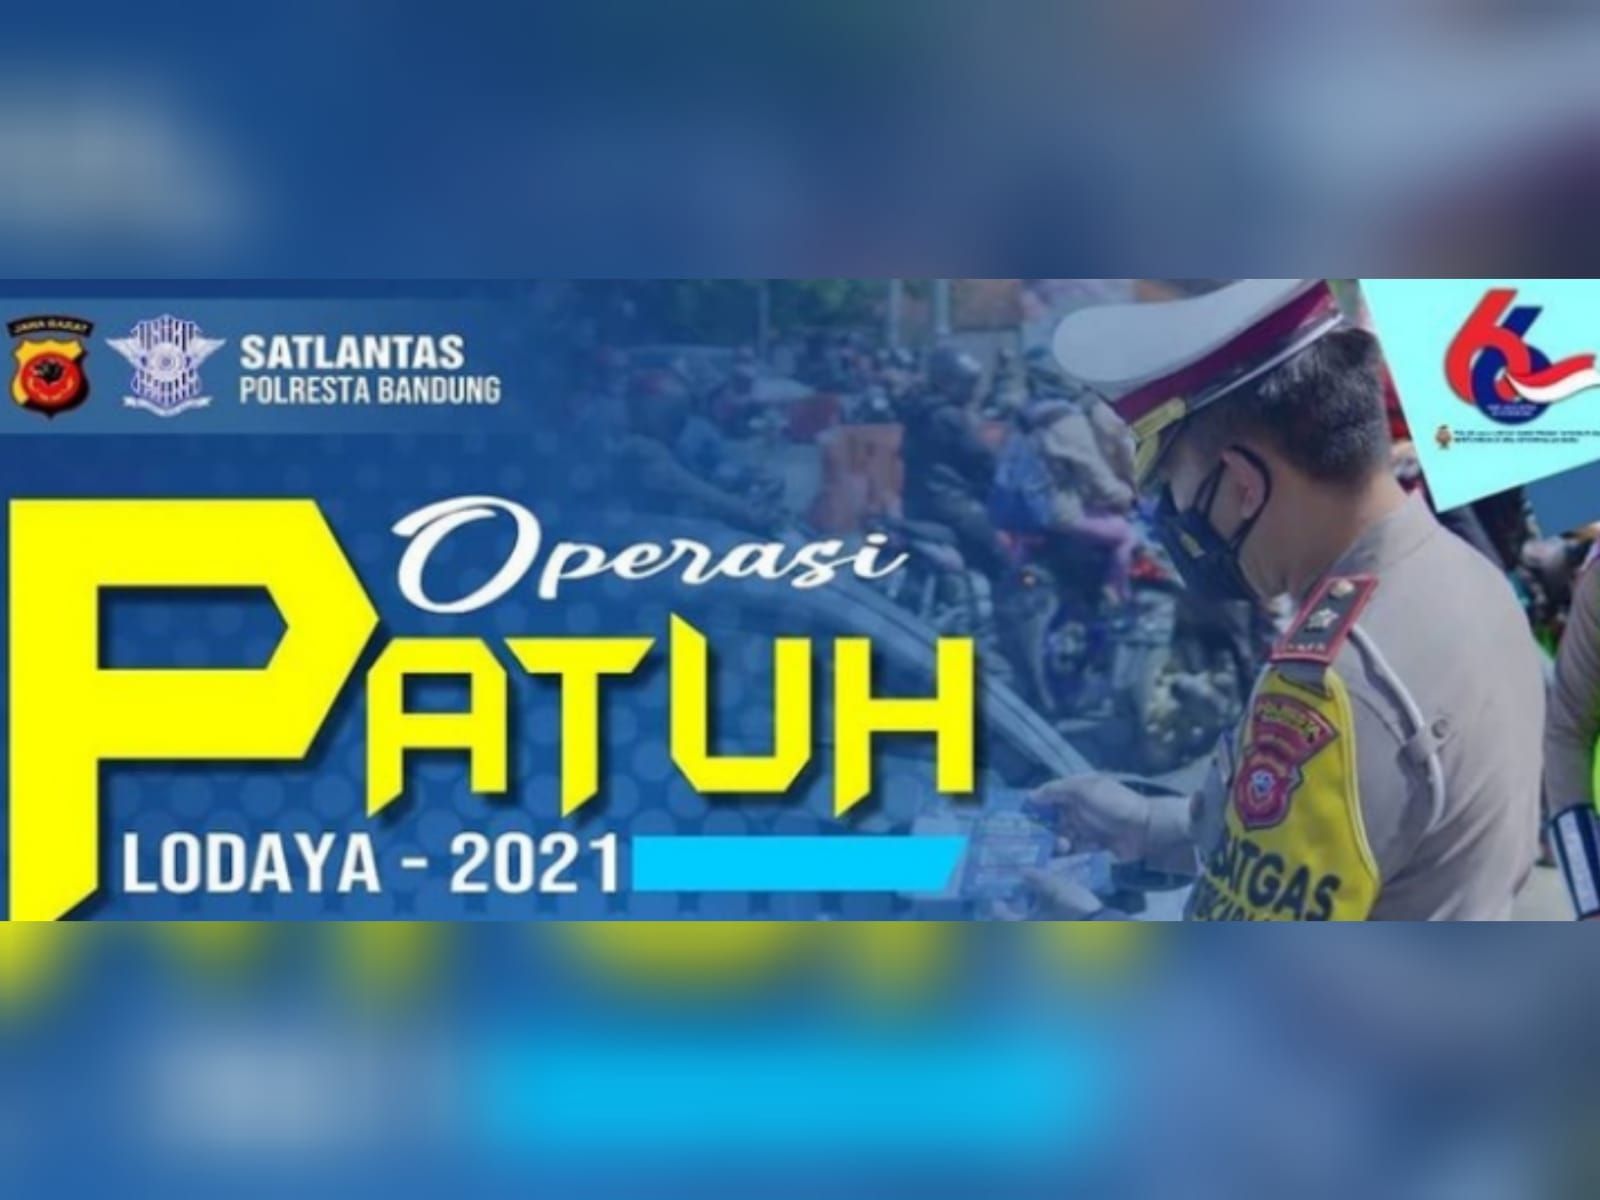 Ops patuh 2021